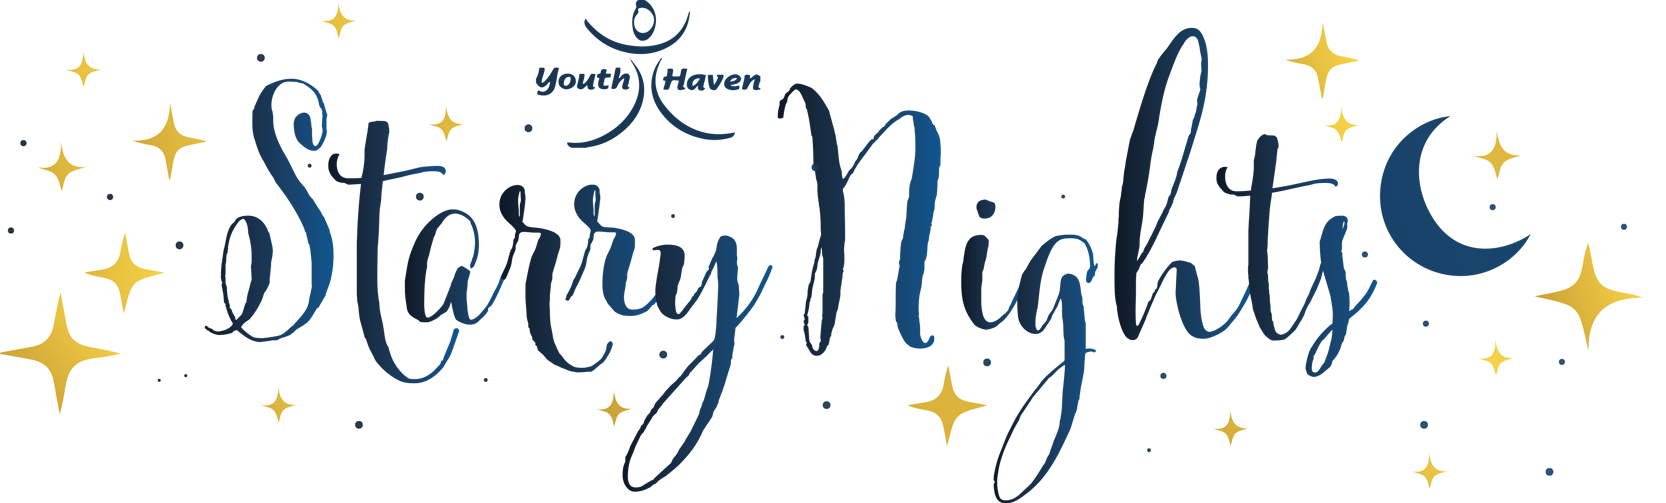 Youth Haven Starry Nights Logo